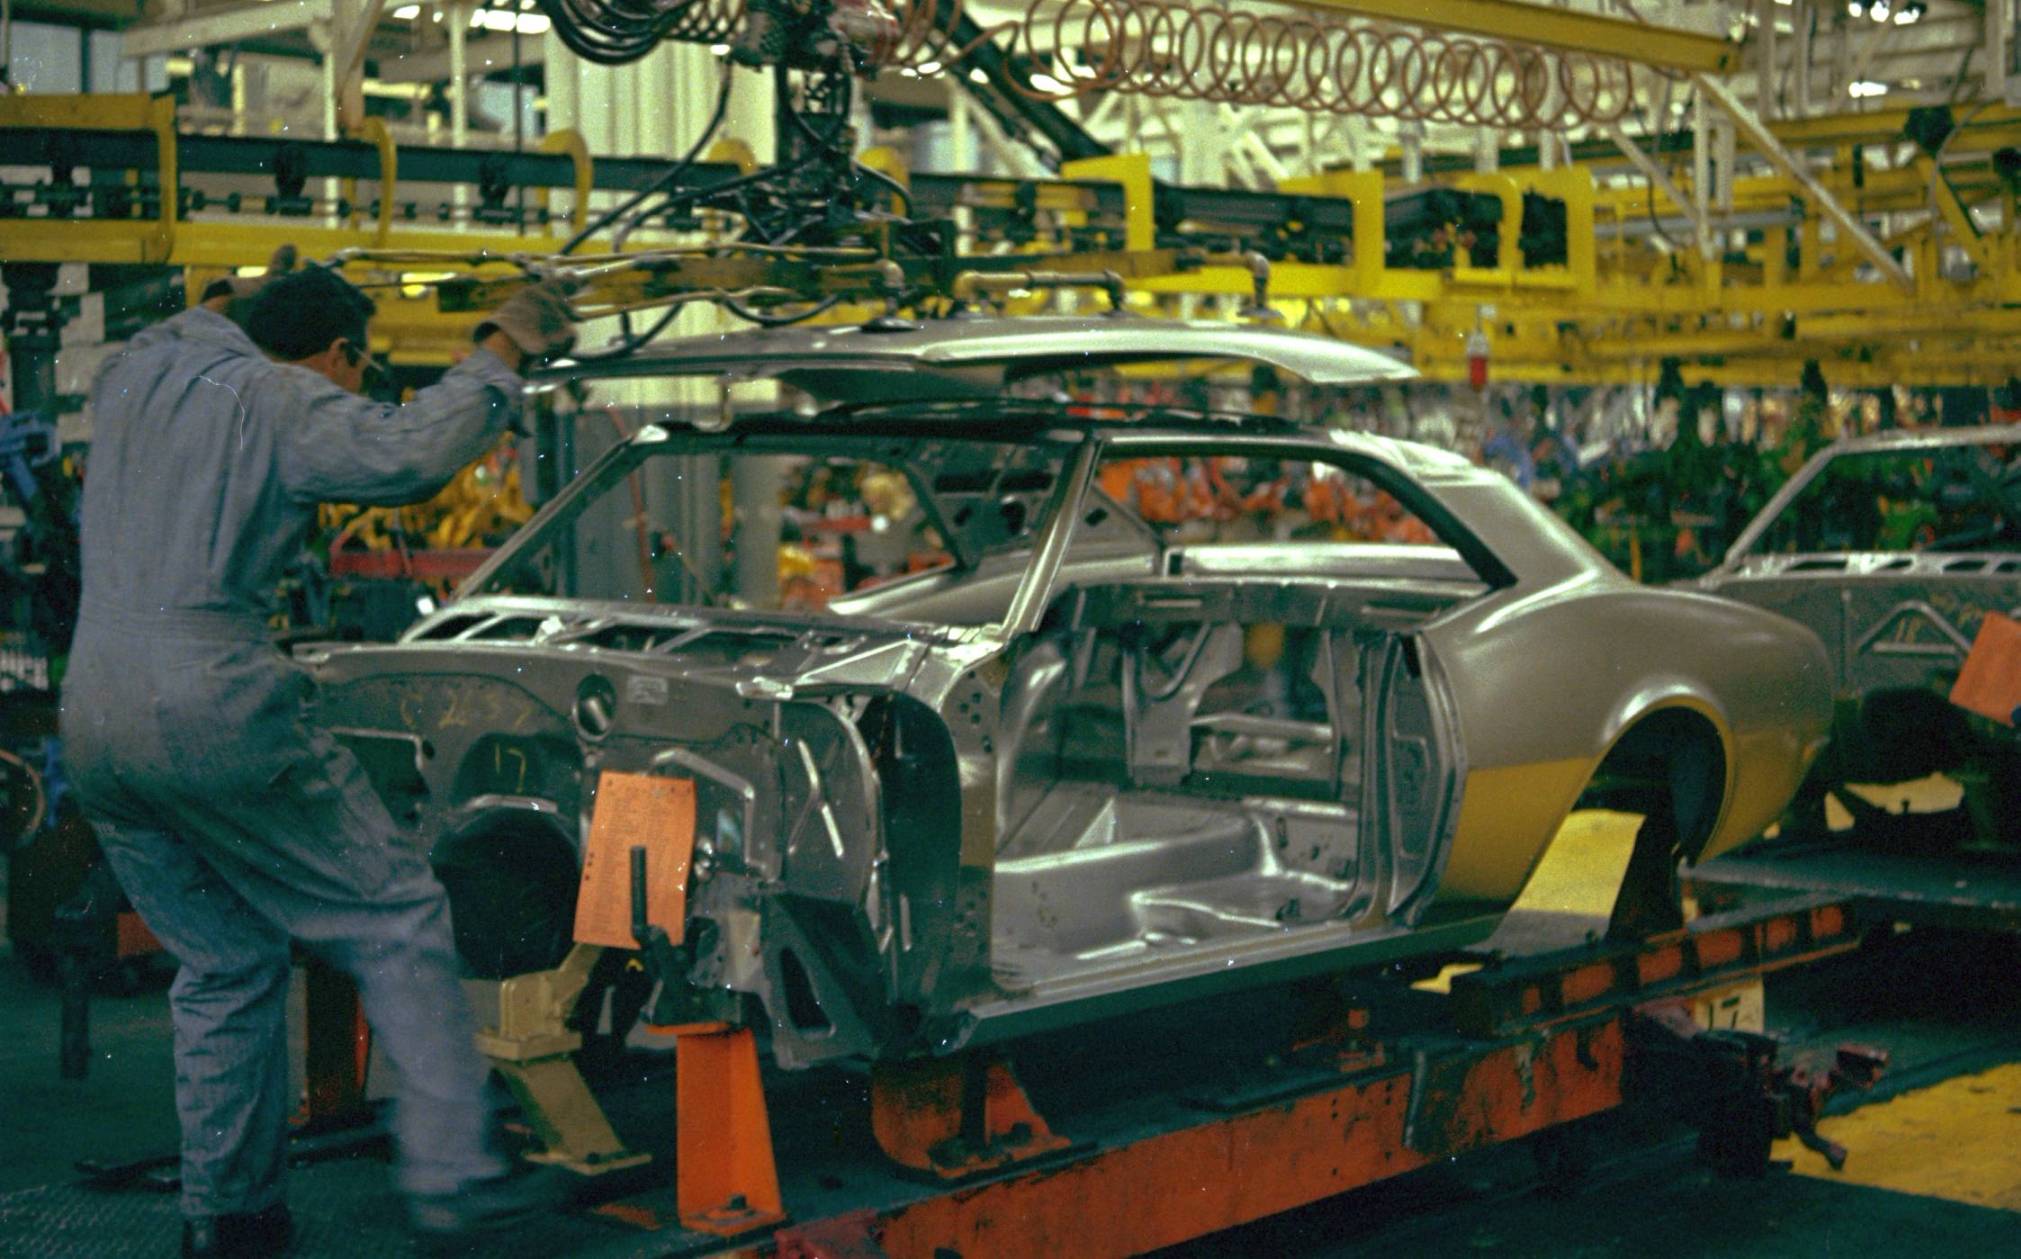 CRG Research Report - Camaro Assembly Process